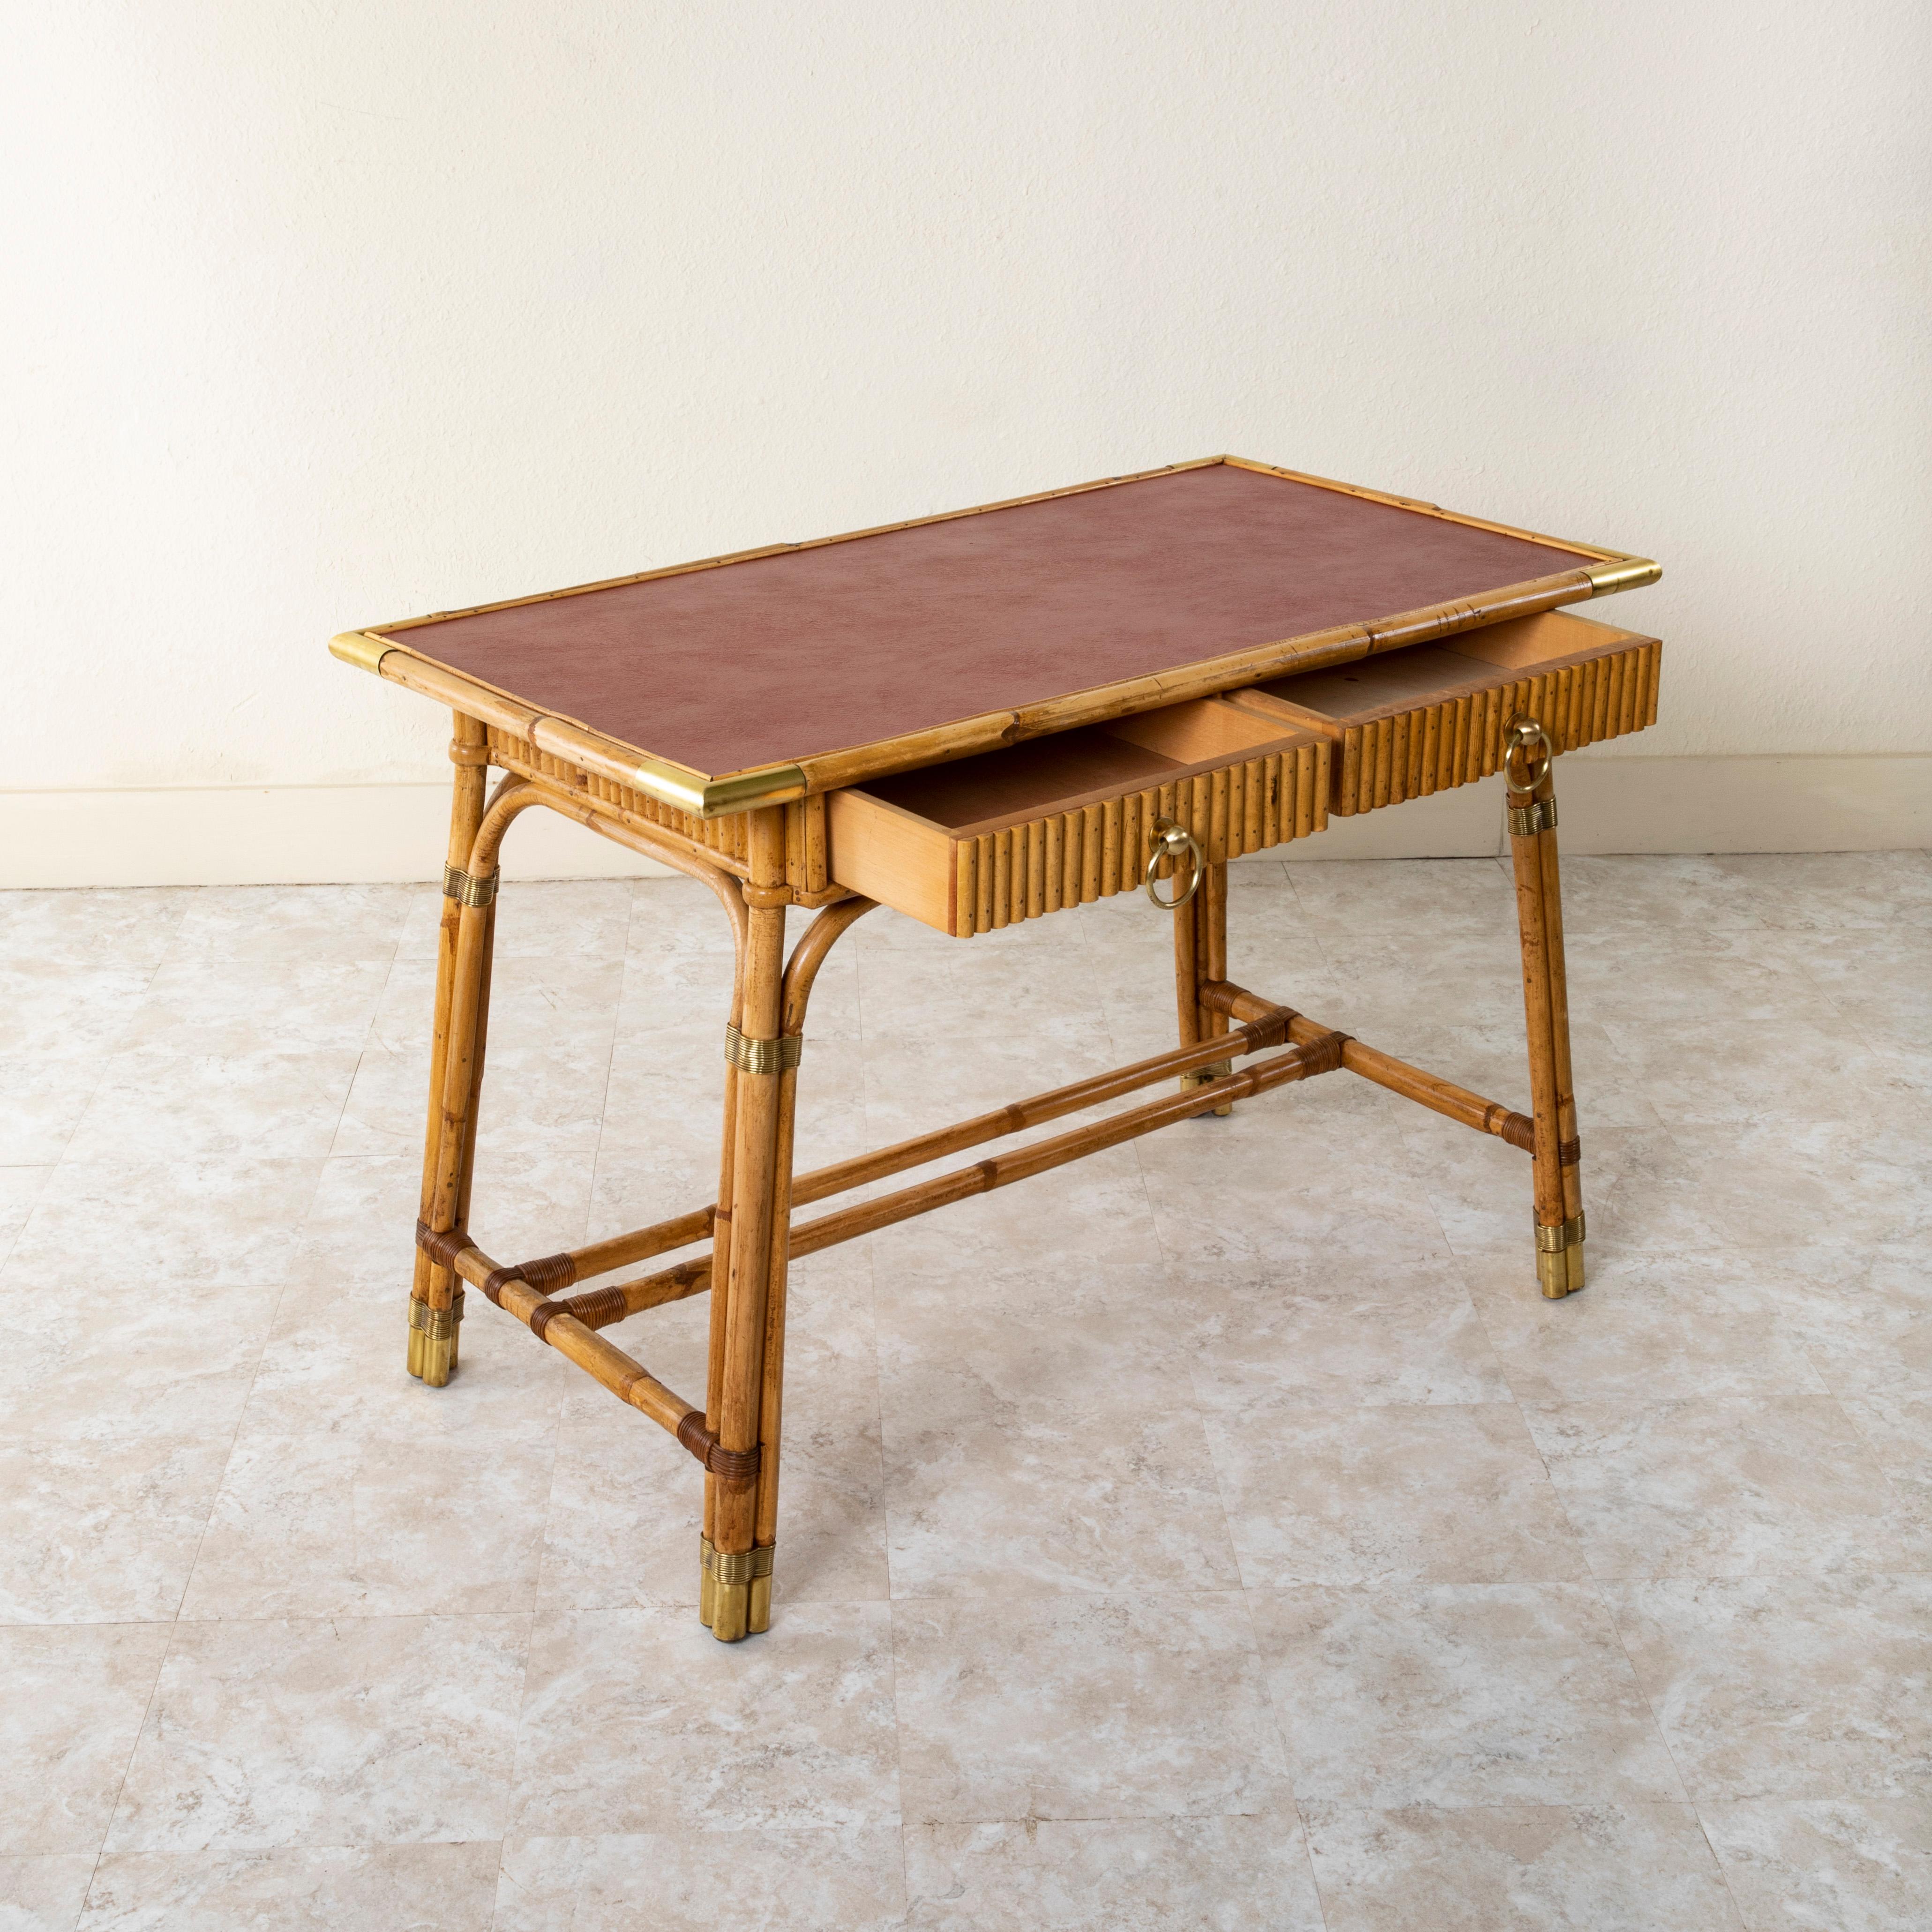 20th Century French Maison Jansen Bamboo Writing Desk and Chair, Louis Sognot 3